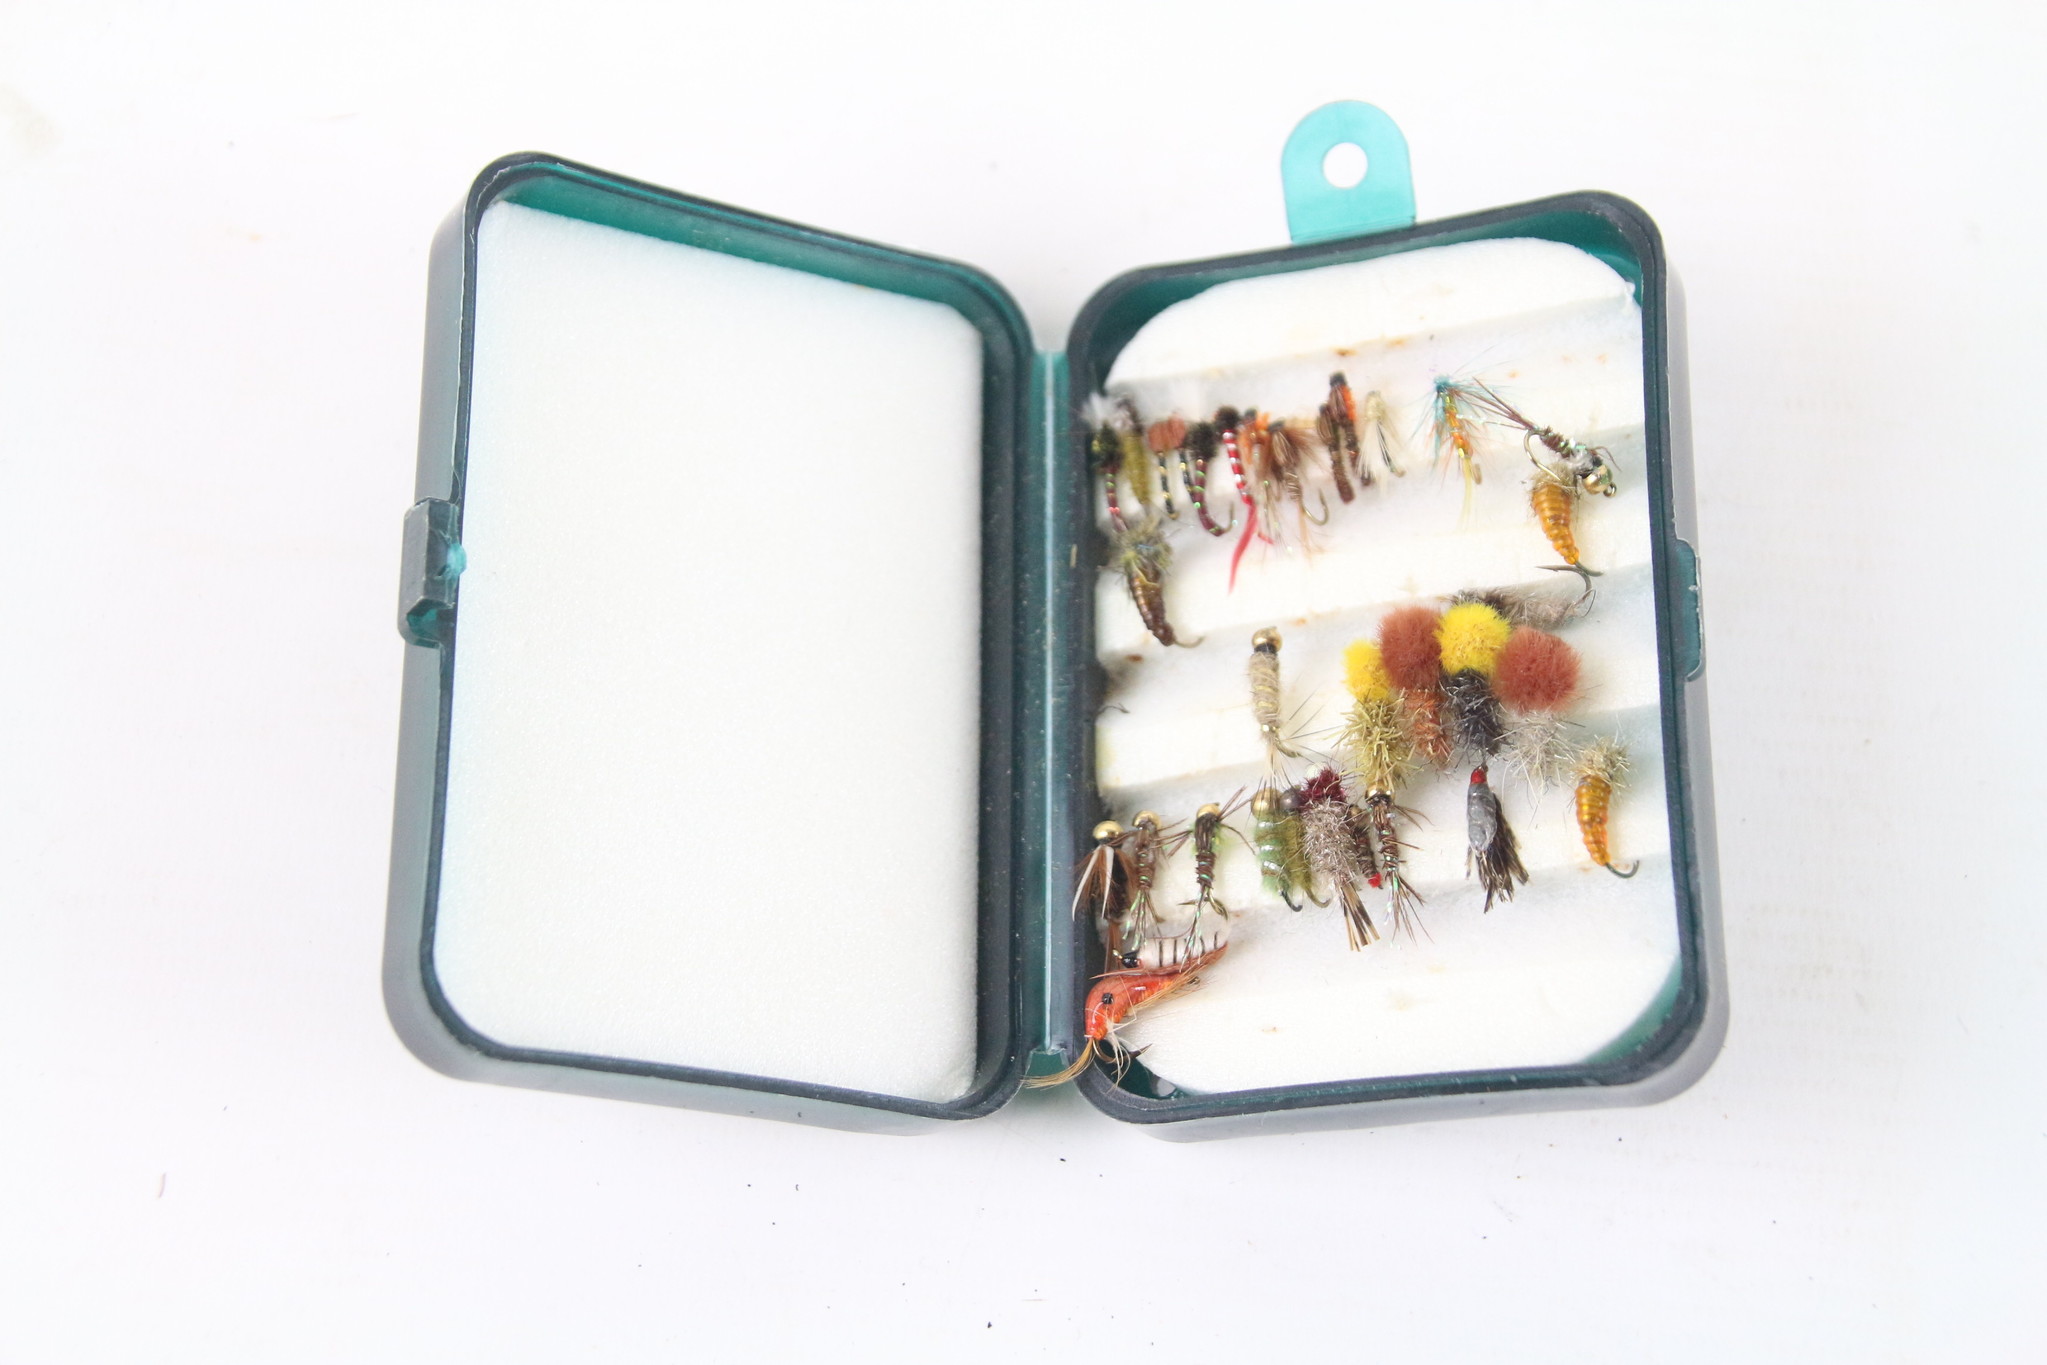 Snowbee model no. 050 fly box filled with 33 nymphs